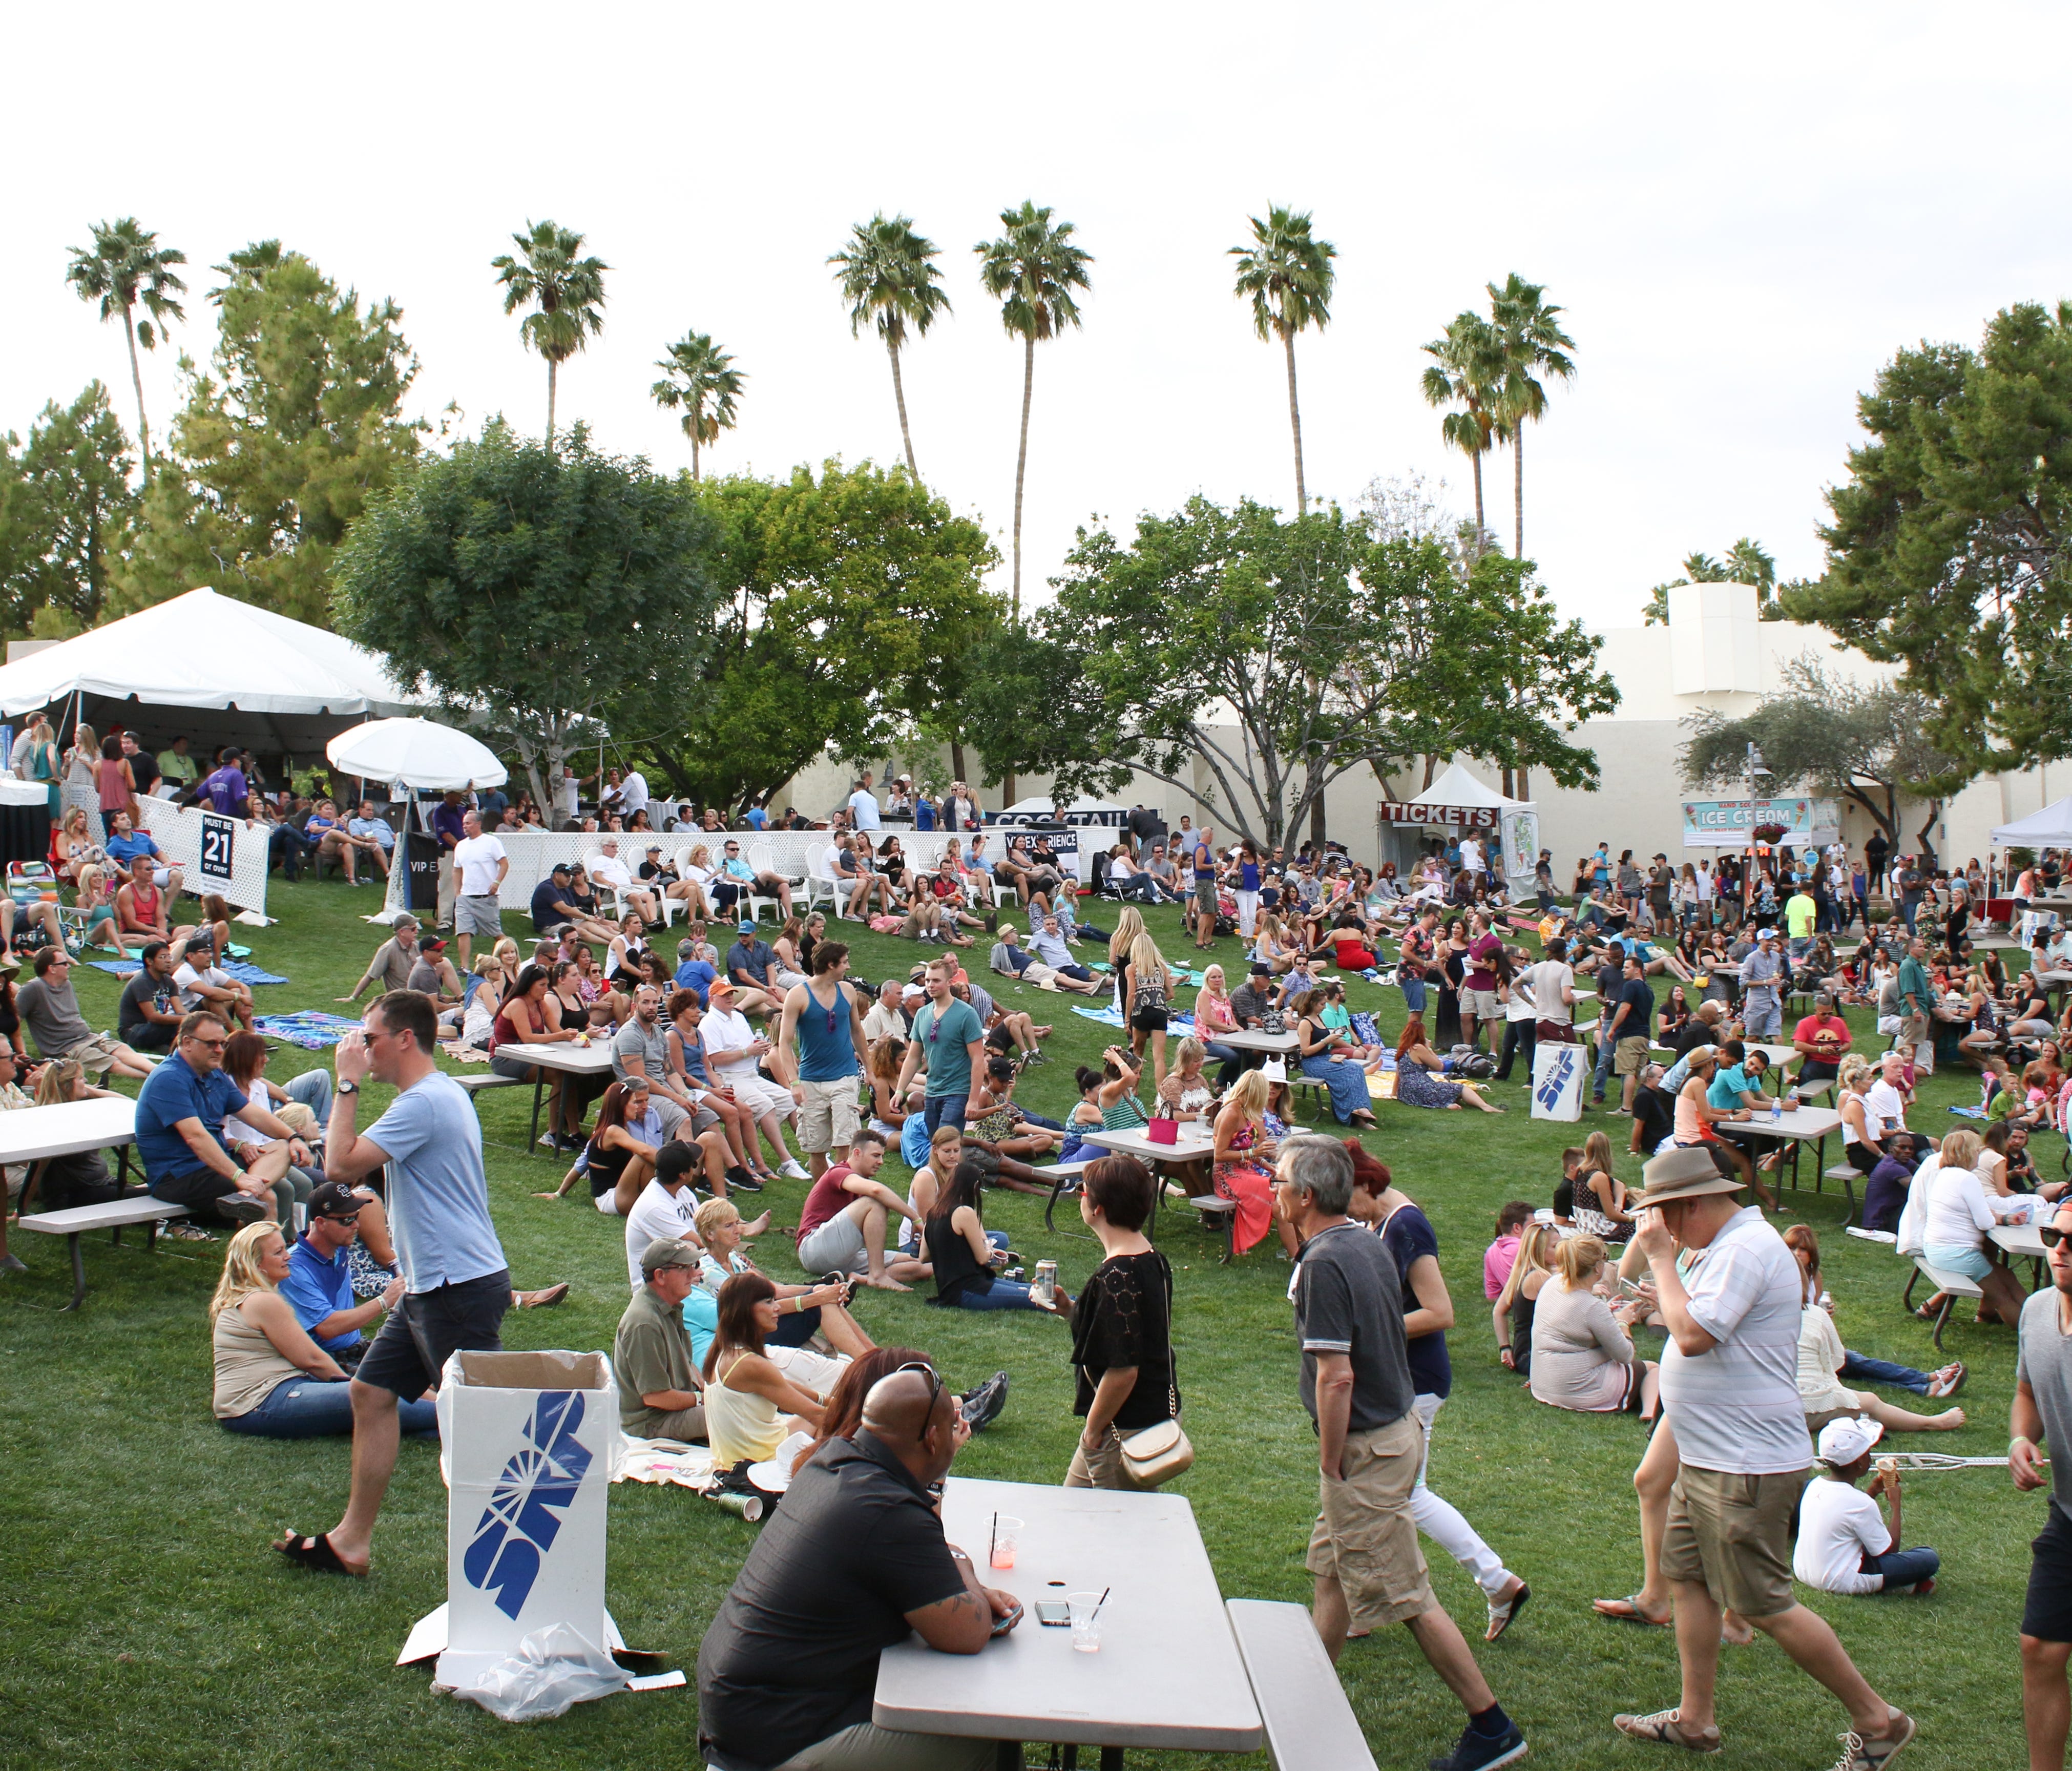 Arizona's Scottsdale Culinary Festival will take place on the Scottsdale Civic Center Mall, April 8-9. Taste from more than 30 local eateries, and sip at a wine garden, beer garden, lounge or vodka deck.